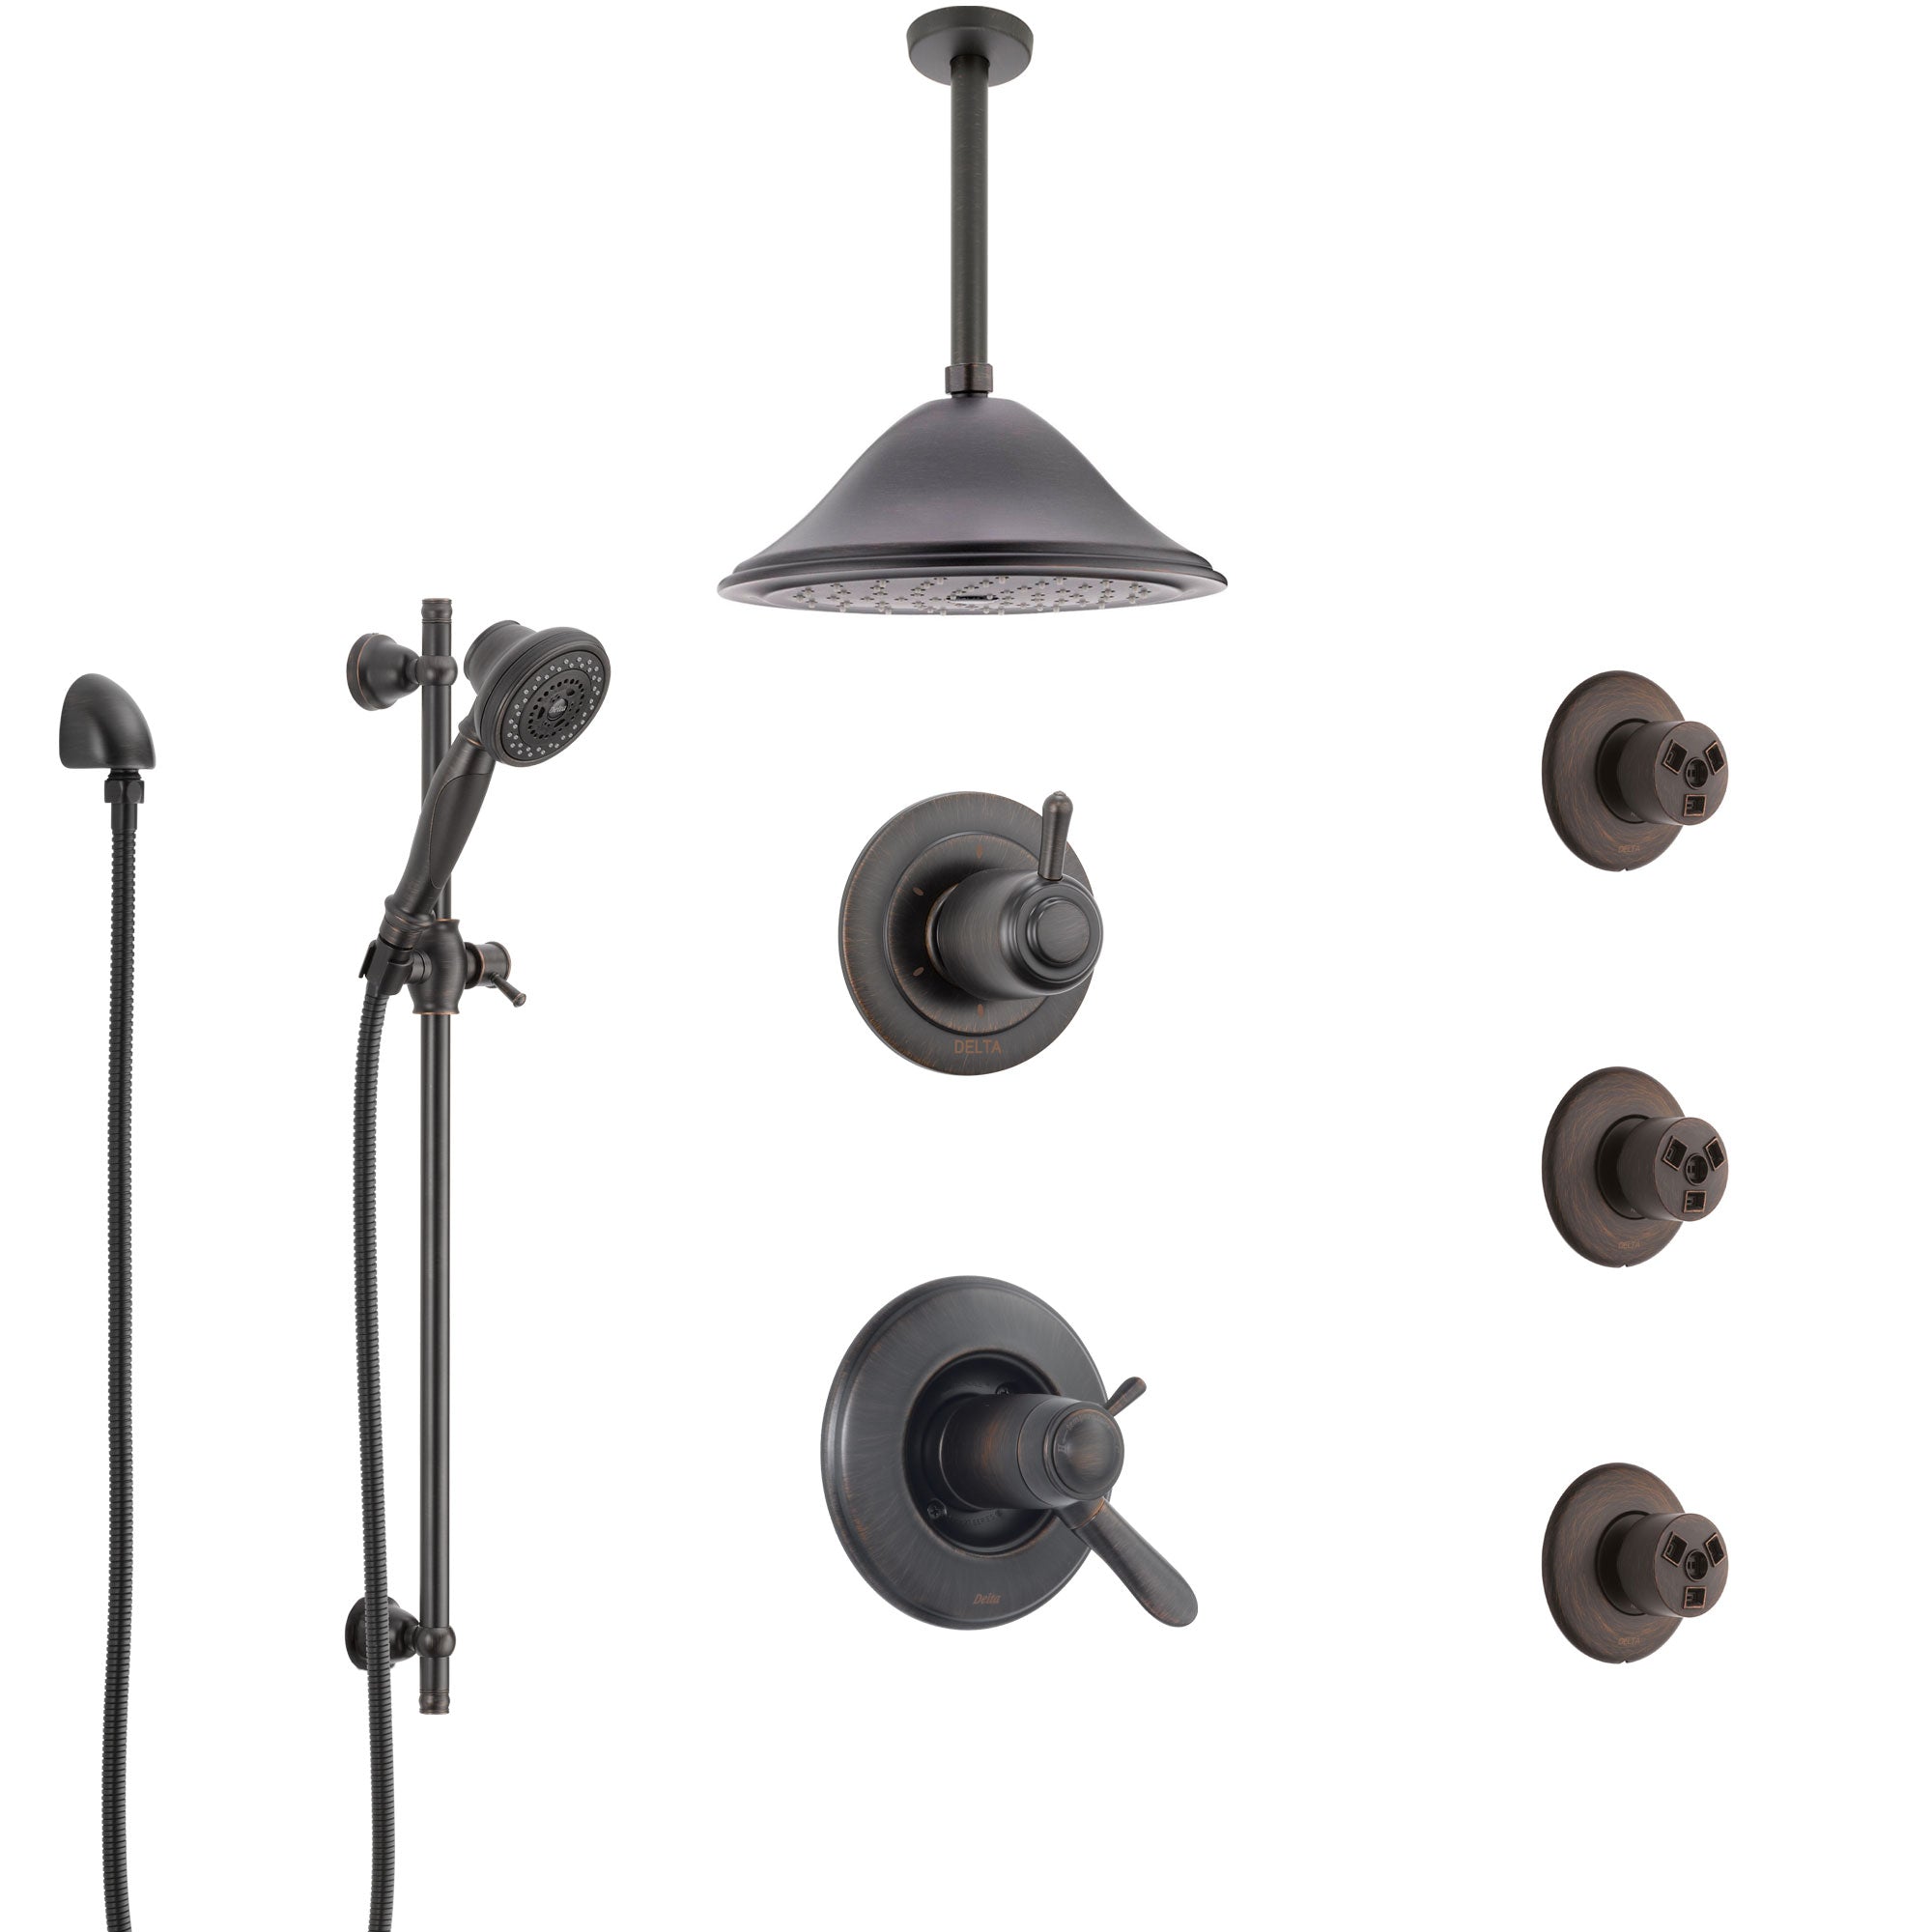 Delta Lahara Venetian Bronze Shower System with Dual Thermostatic Control, Diverter, Ceiling Showerhead, 3 Body Sprays, and Hand Shower SS17T382RB8